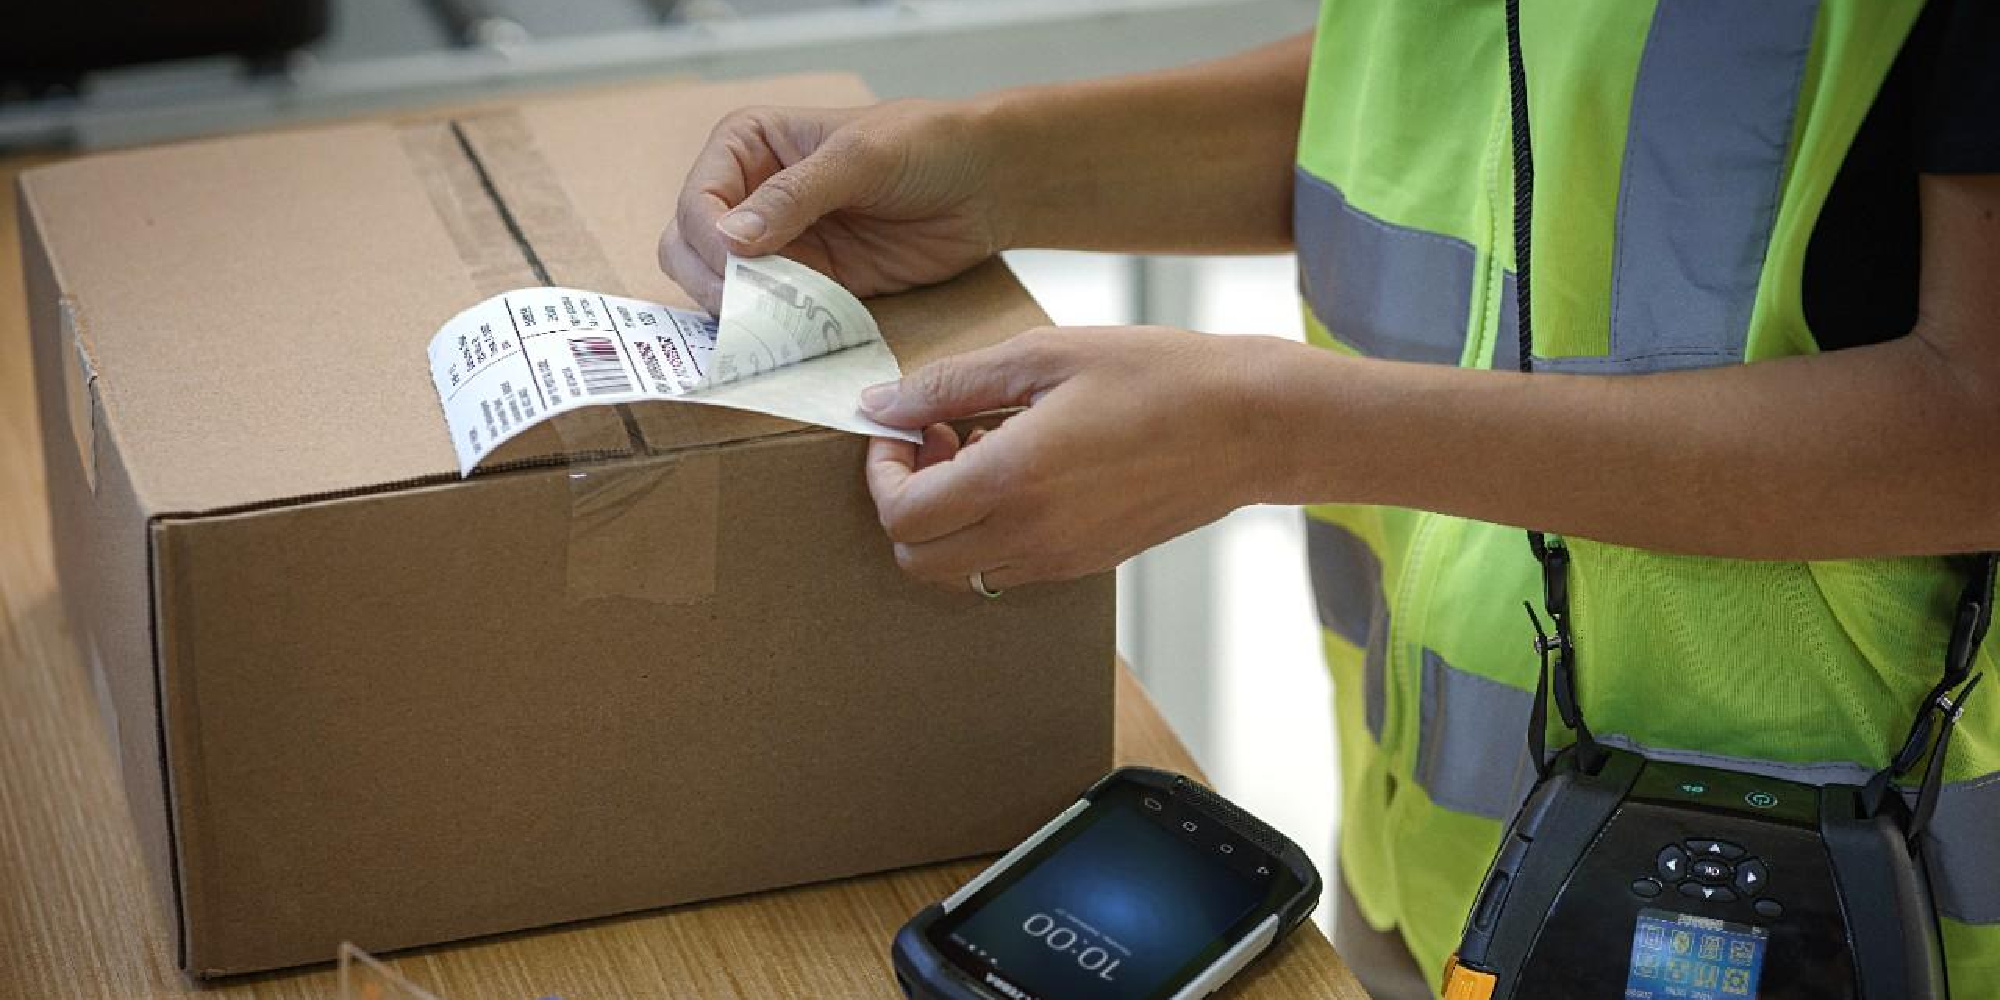 Everything You Need to Consider When Selecting the Right RFID Labels or Tags